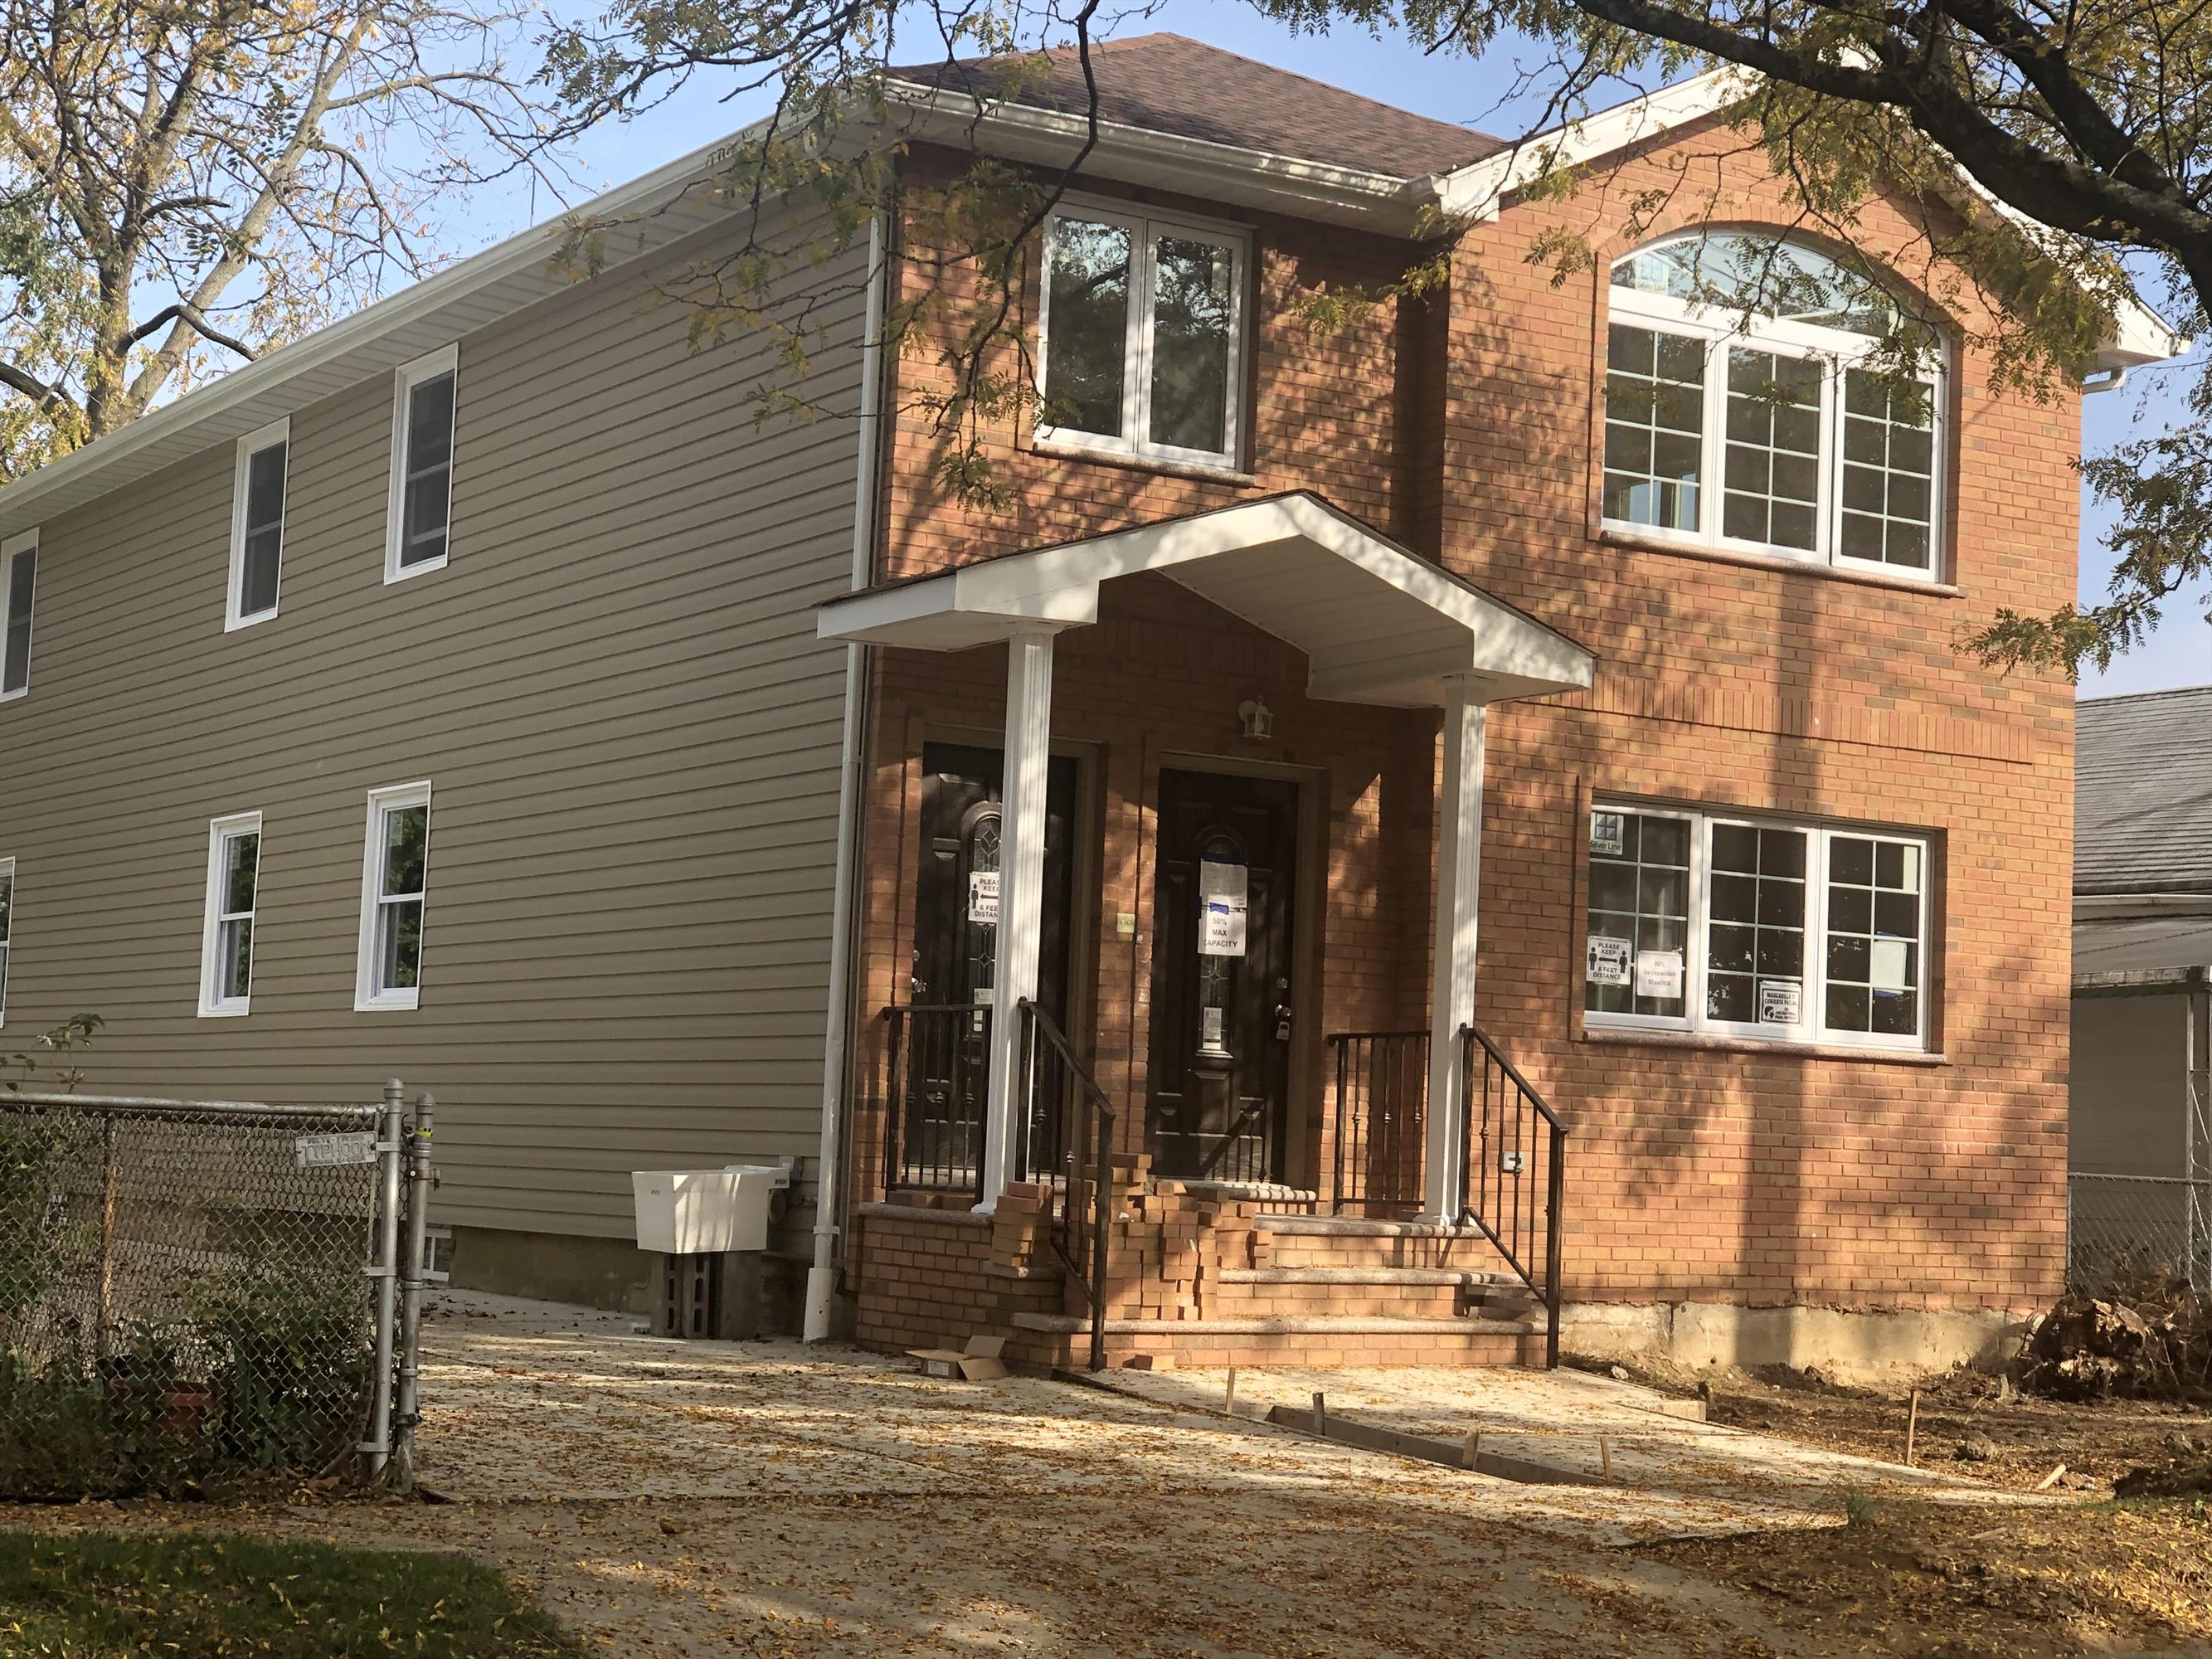 A fabulous and spacious new 2 family home, featuring 3 BR and 2 full Bathrooms, large living room and state of art kitchen and appliances on each floor. Wood floor throughout the house, full finished basement with full bathroom. Central AC/heat. Huge driveway.